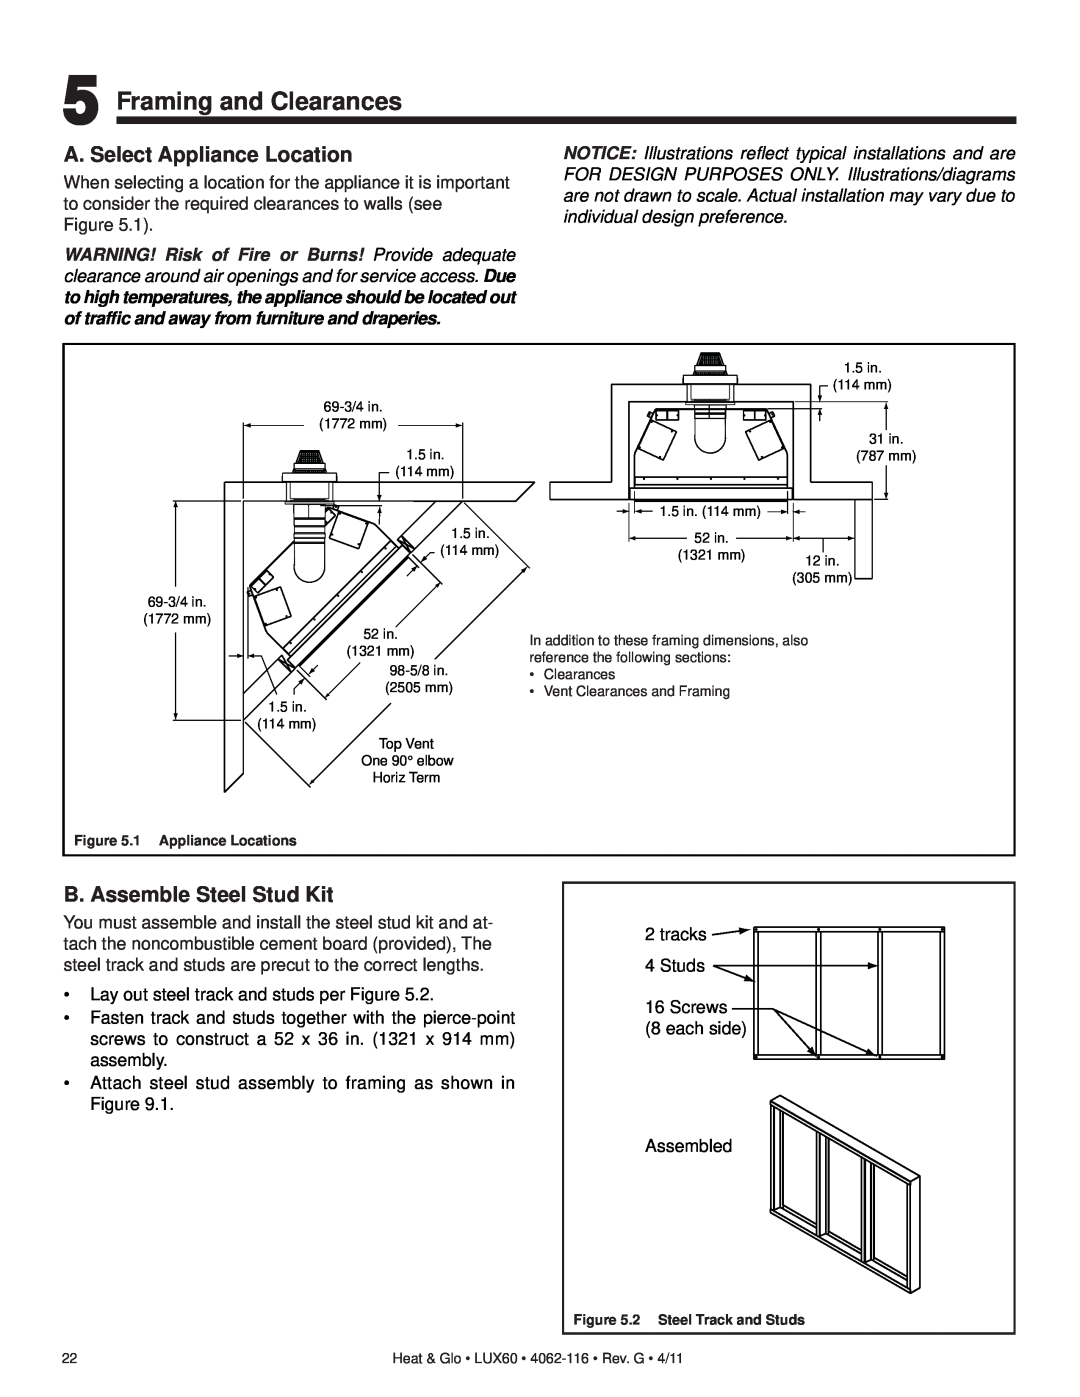 Heat & Glo LifeStyle LUX60 owner manual Framing and Clearances, A. Select Appliance Location, B. Assemble Steel Stud Kit 